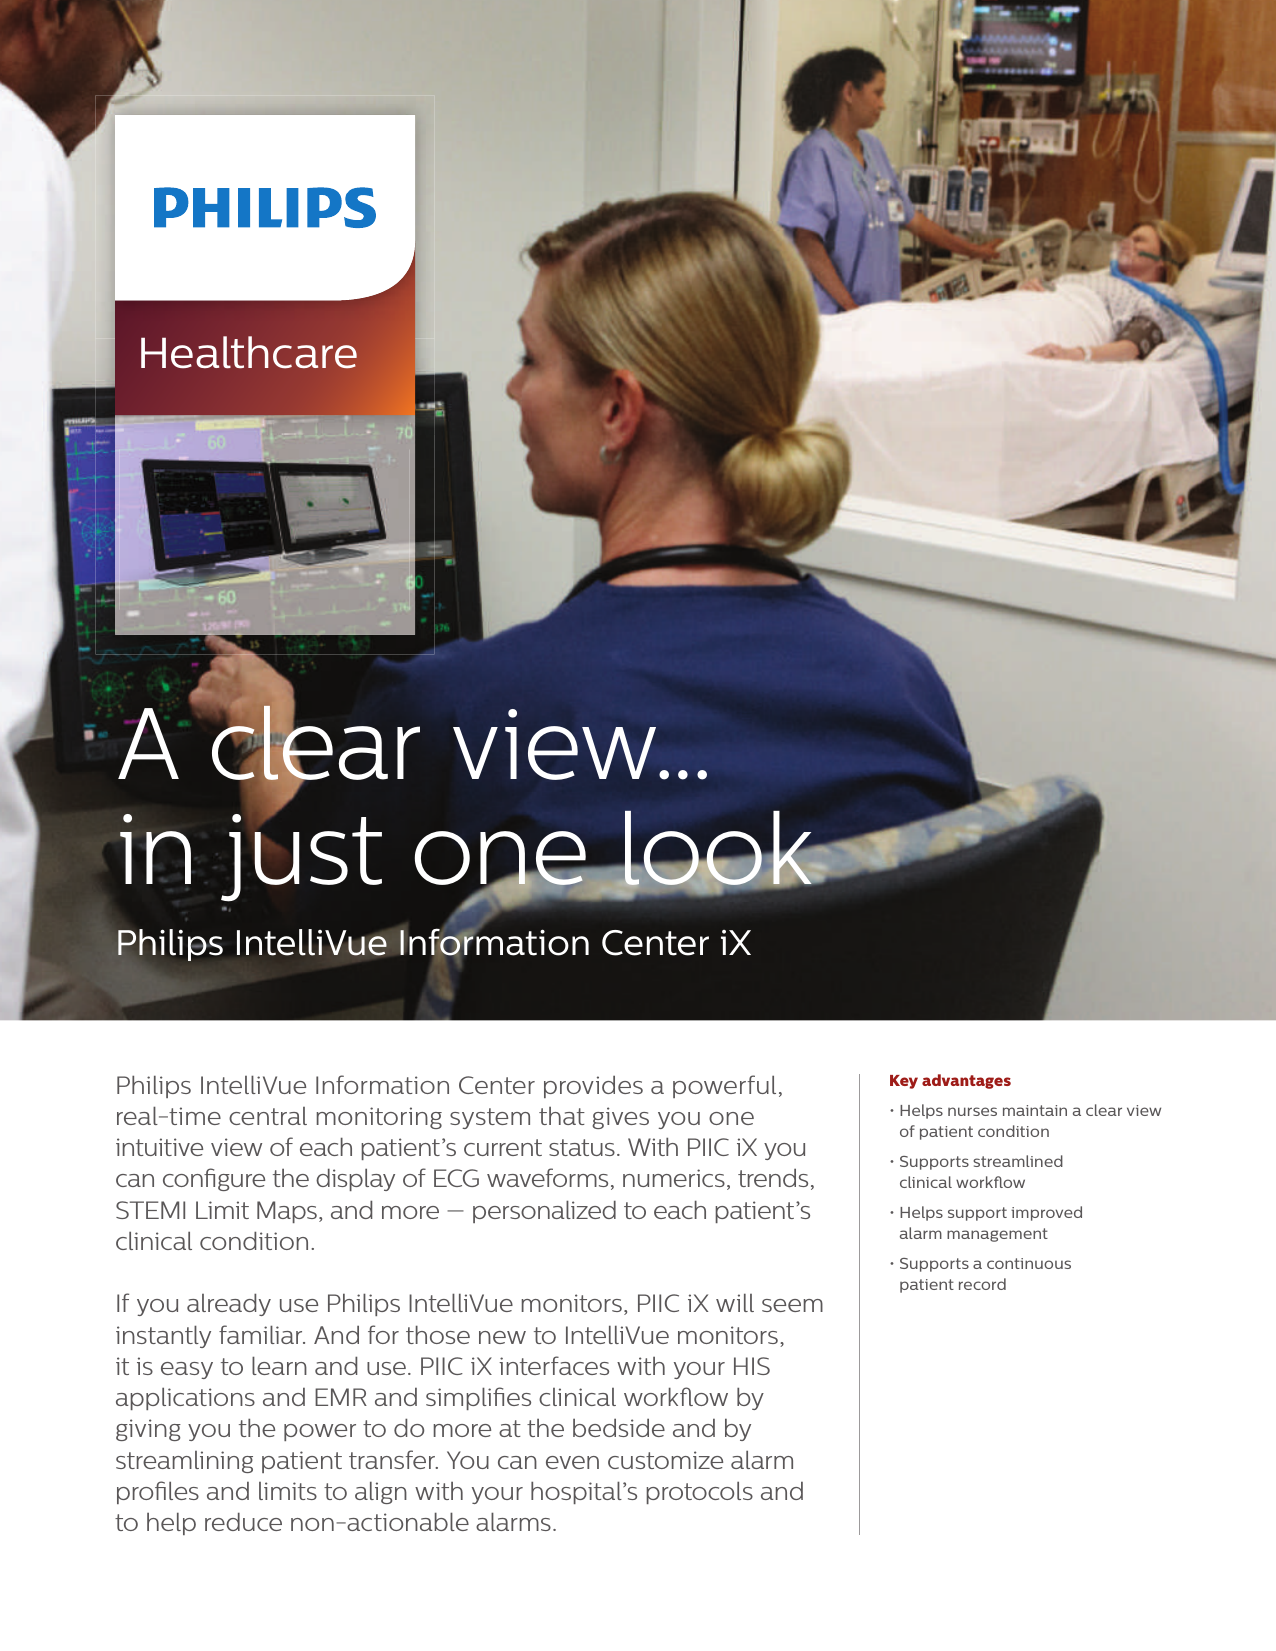 Page 1 of 1 - Philips NOCTN171 Object Moved User Manual Product Brochure Intelli Vue Central Monitoring System Information Center I X (PIIC X) E8b52b87631d47c6955fa77c015cd5aa